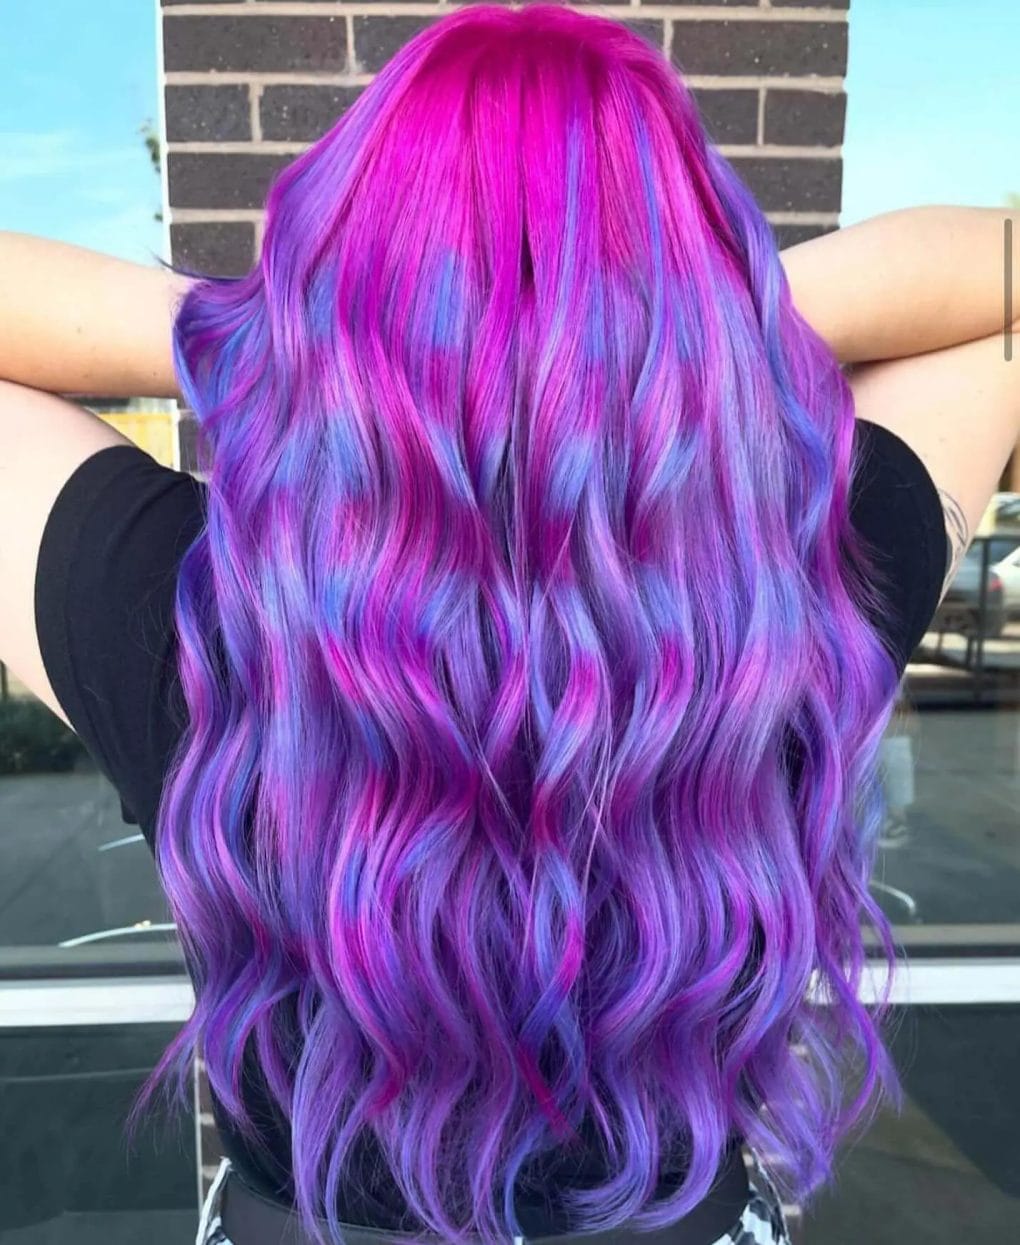 Vibrant gradient waves transitioning from magenta to pastel purple, reflecting festival boldness and creativity.